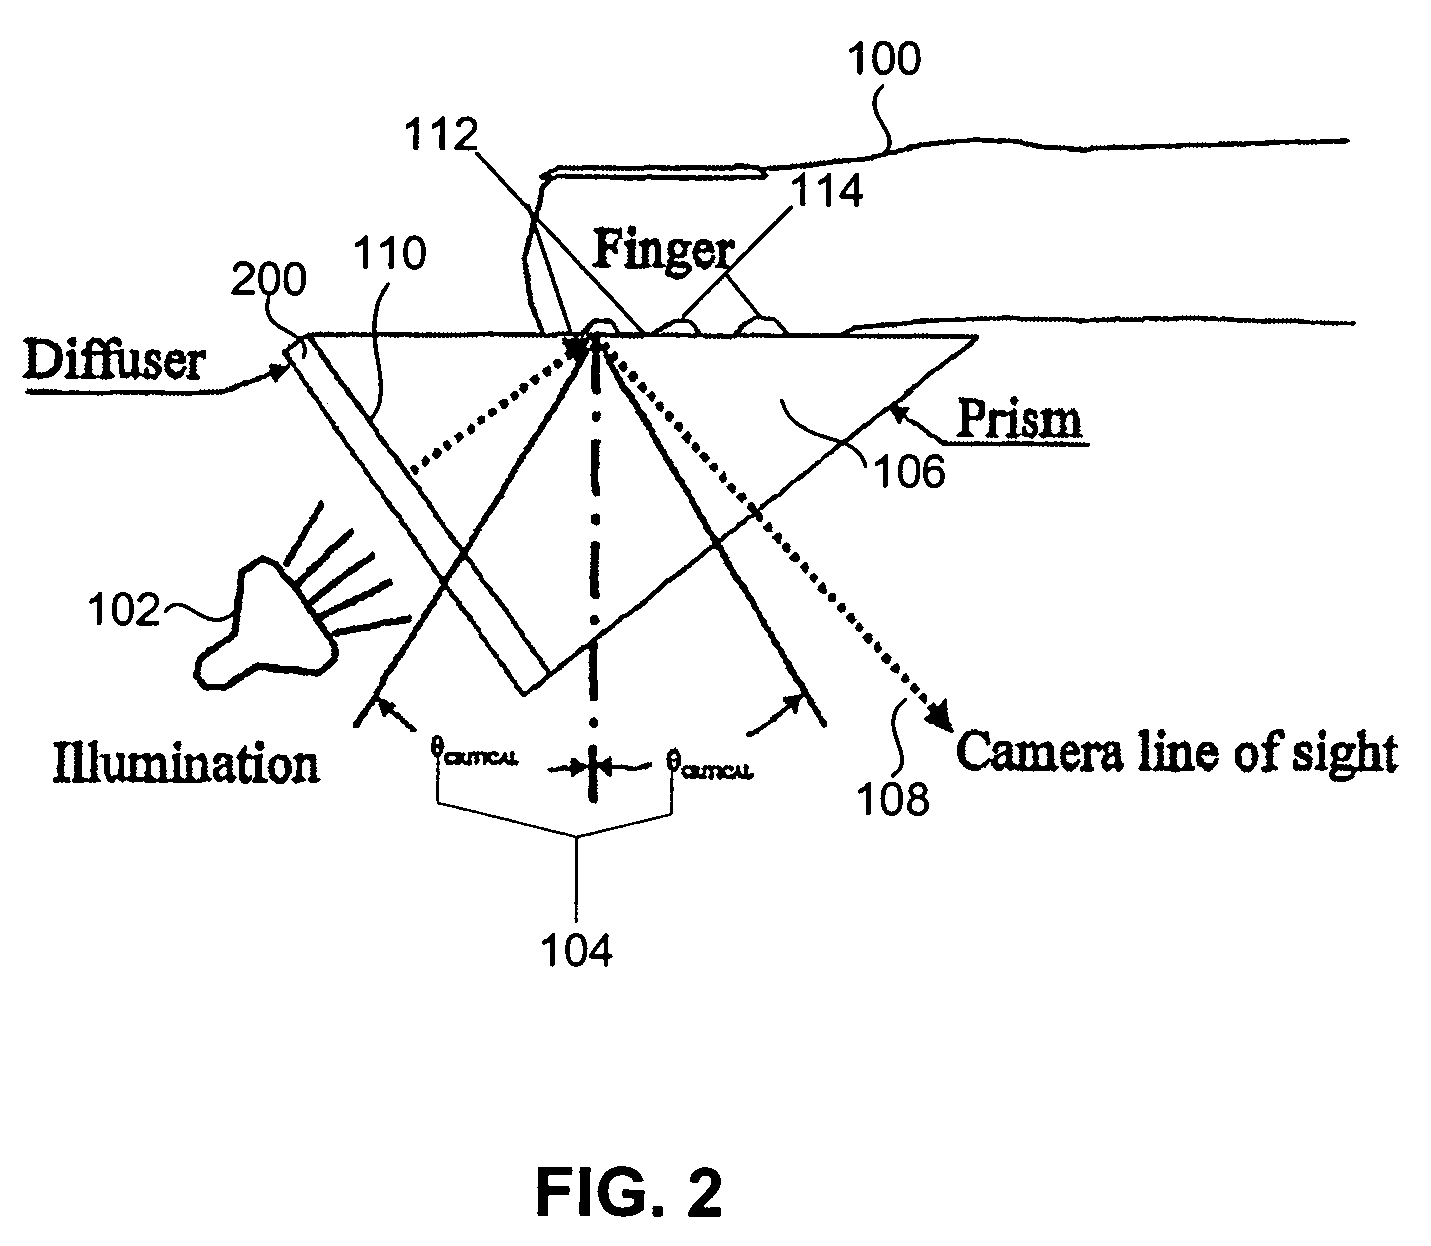 Apparatus and method for obtaining images using a prism